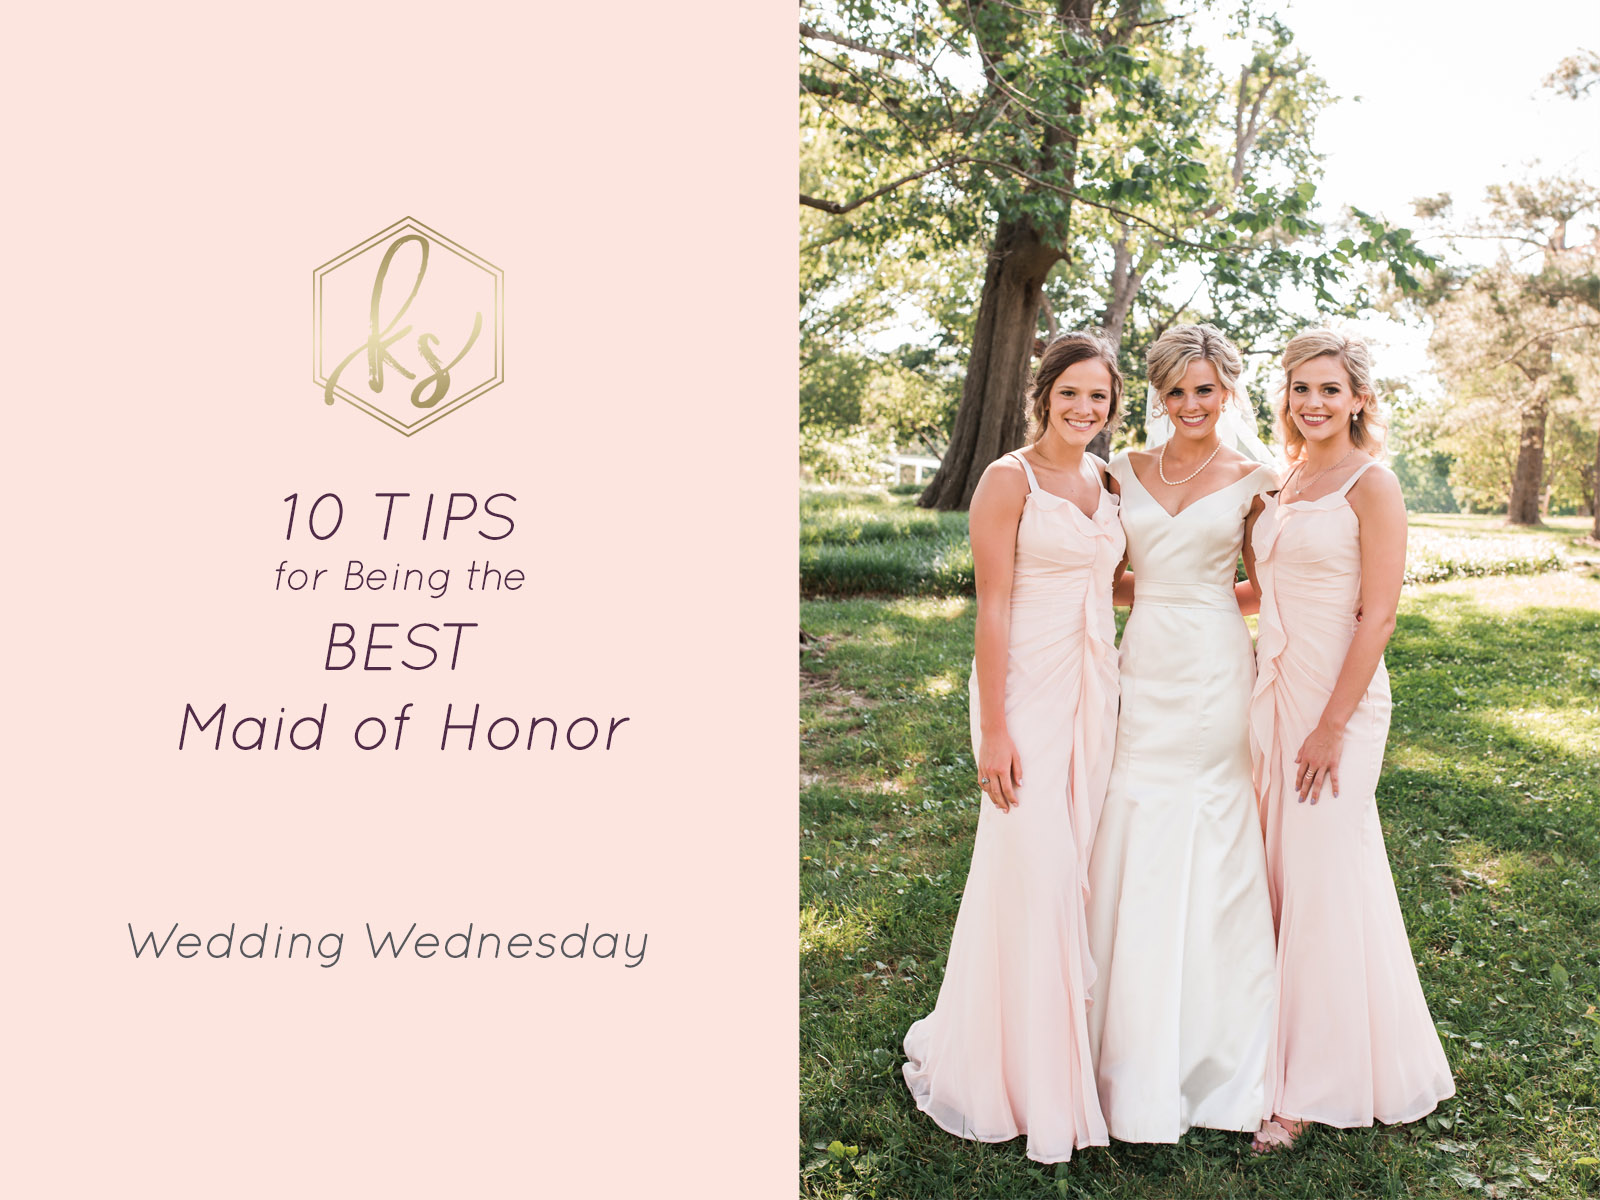 Tips for Being the Best Maid of Honor